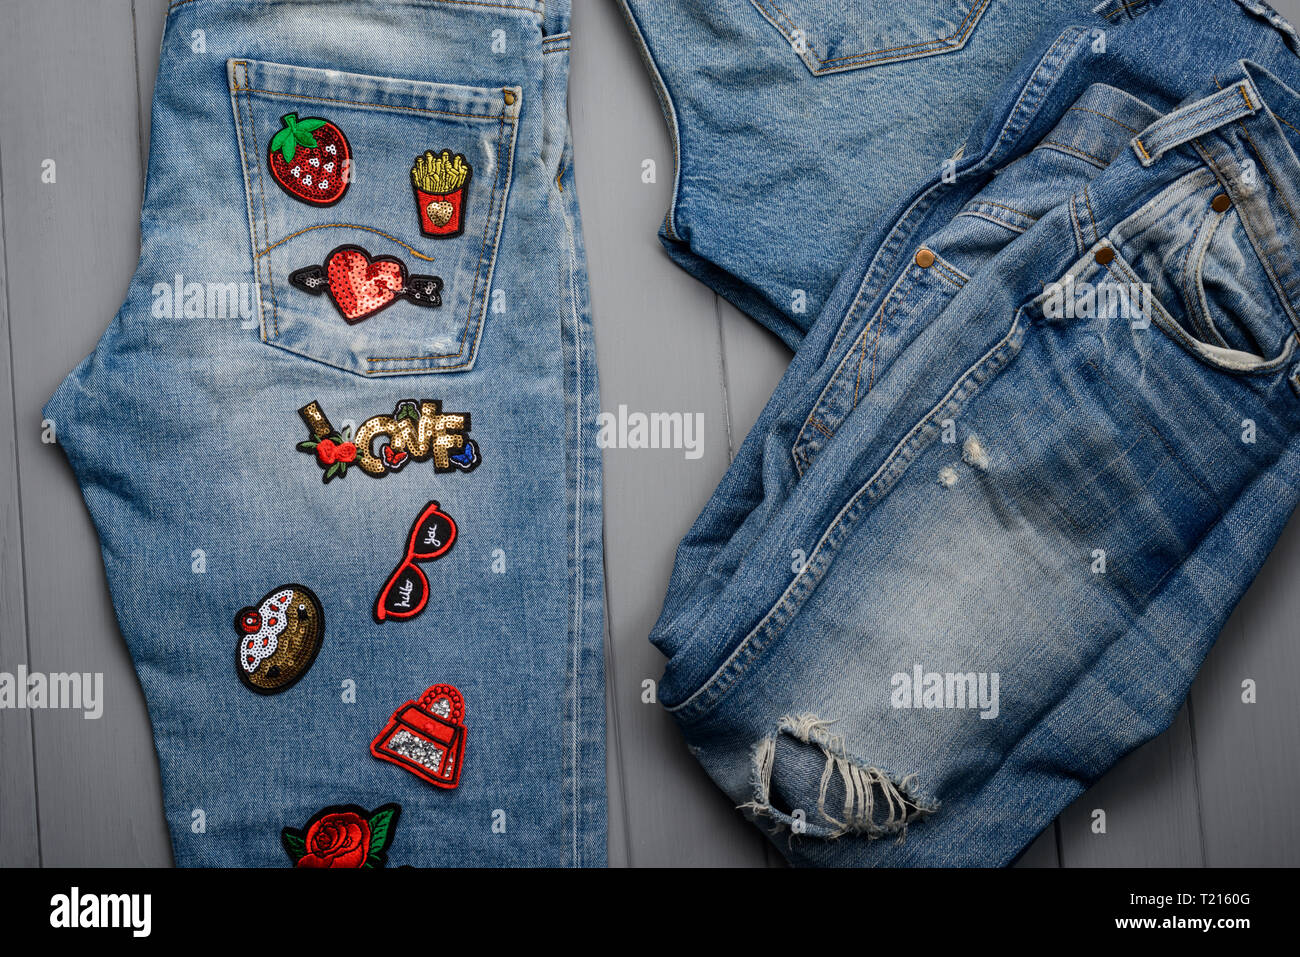 Jeans decorated with various patches Stock Photo